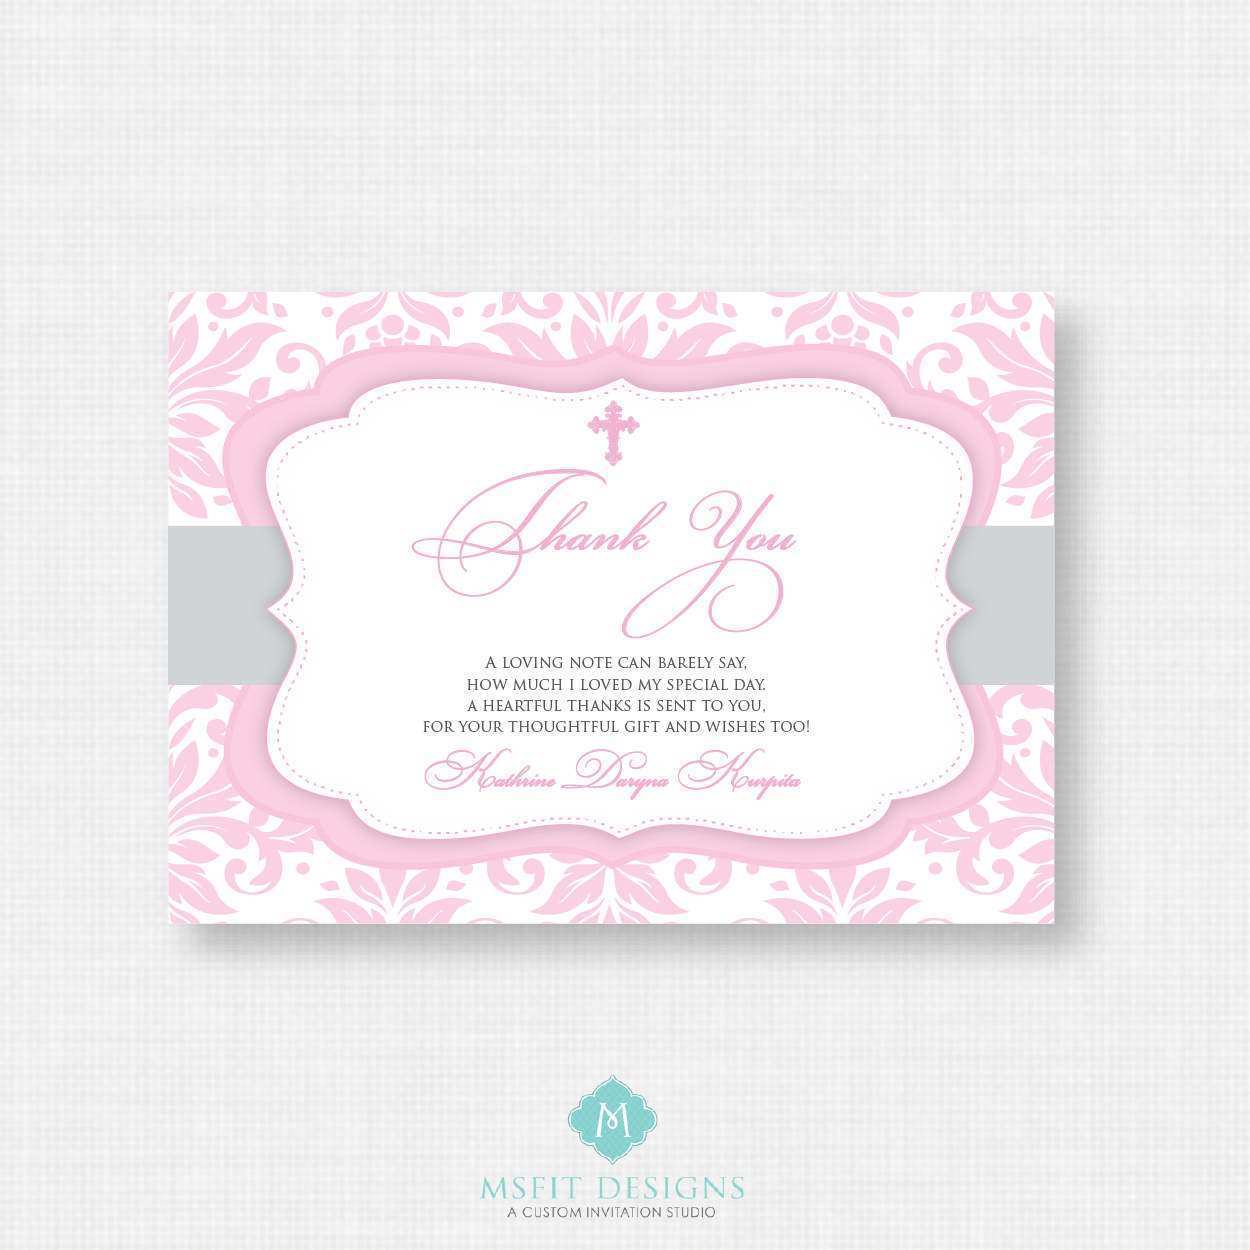 22 Customize Christening Thank You Card Template Free in Photoshop with Christening Thank You Card Template Free